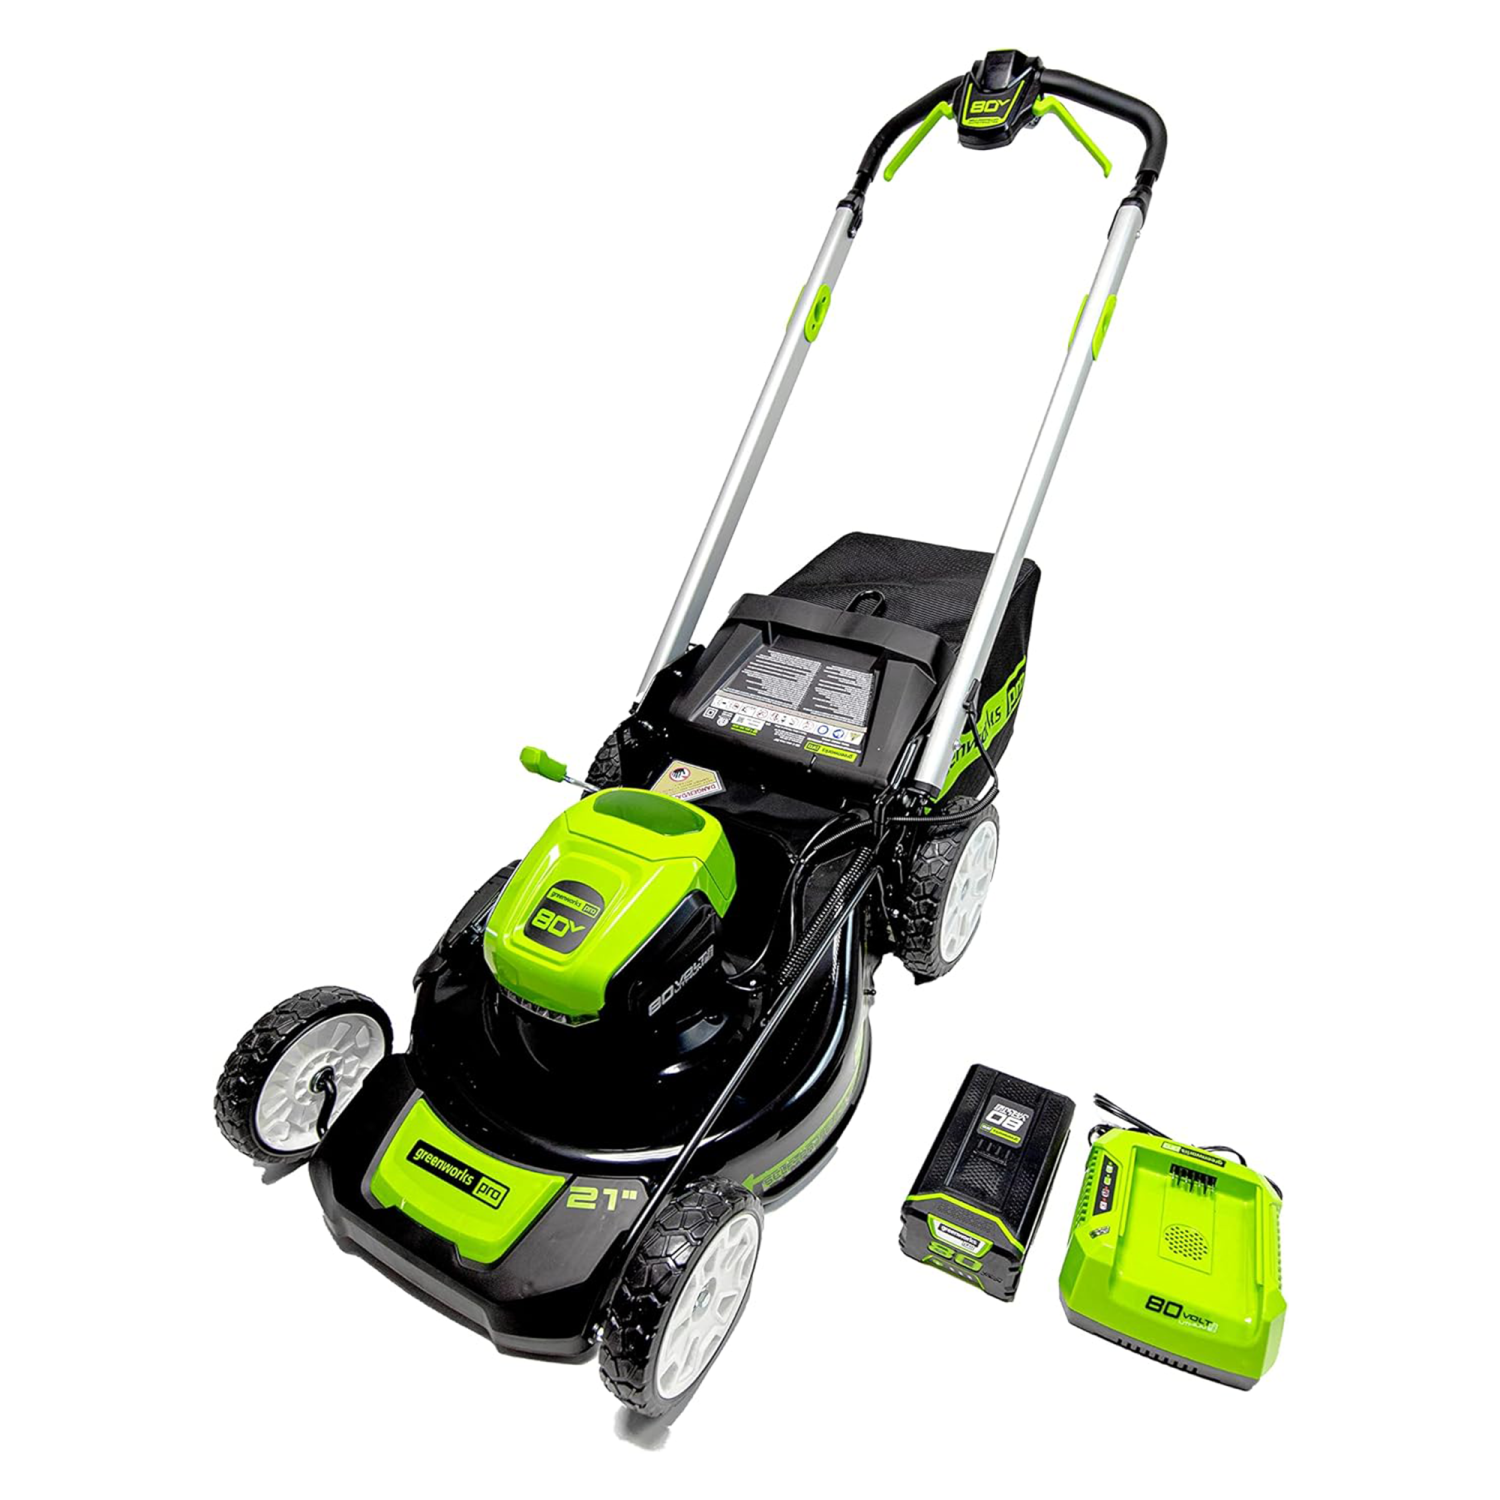 Greenworks 80V 21" Brushless Cordless Self-Propelled Lawn Mower, 4.0Ah Battery and Charger Included [75+ Compatible Tools]